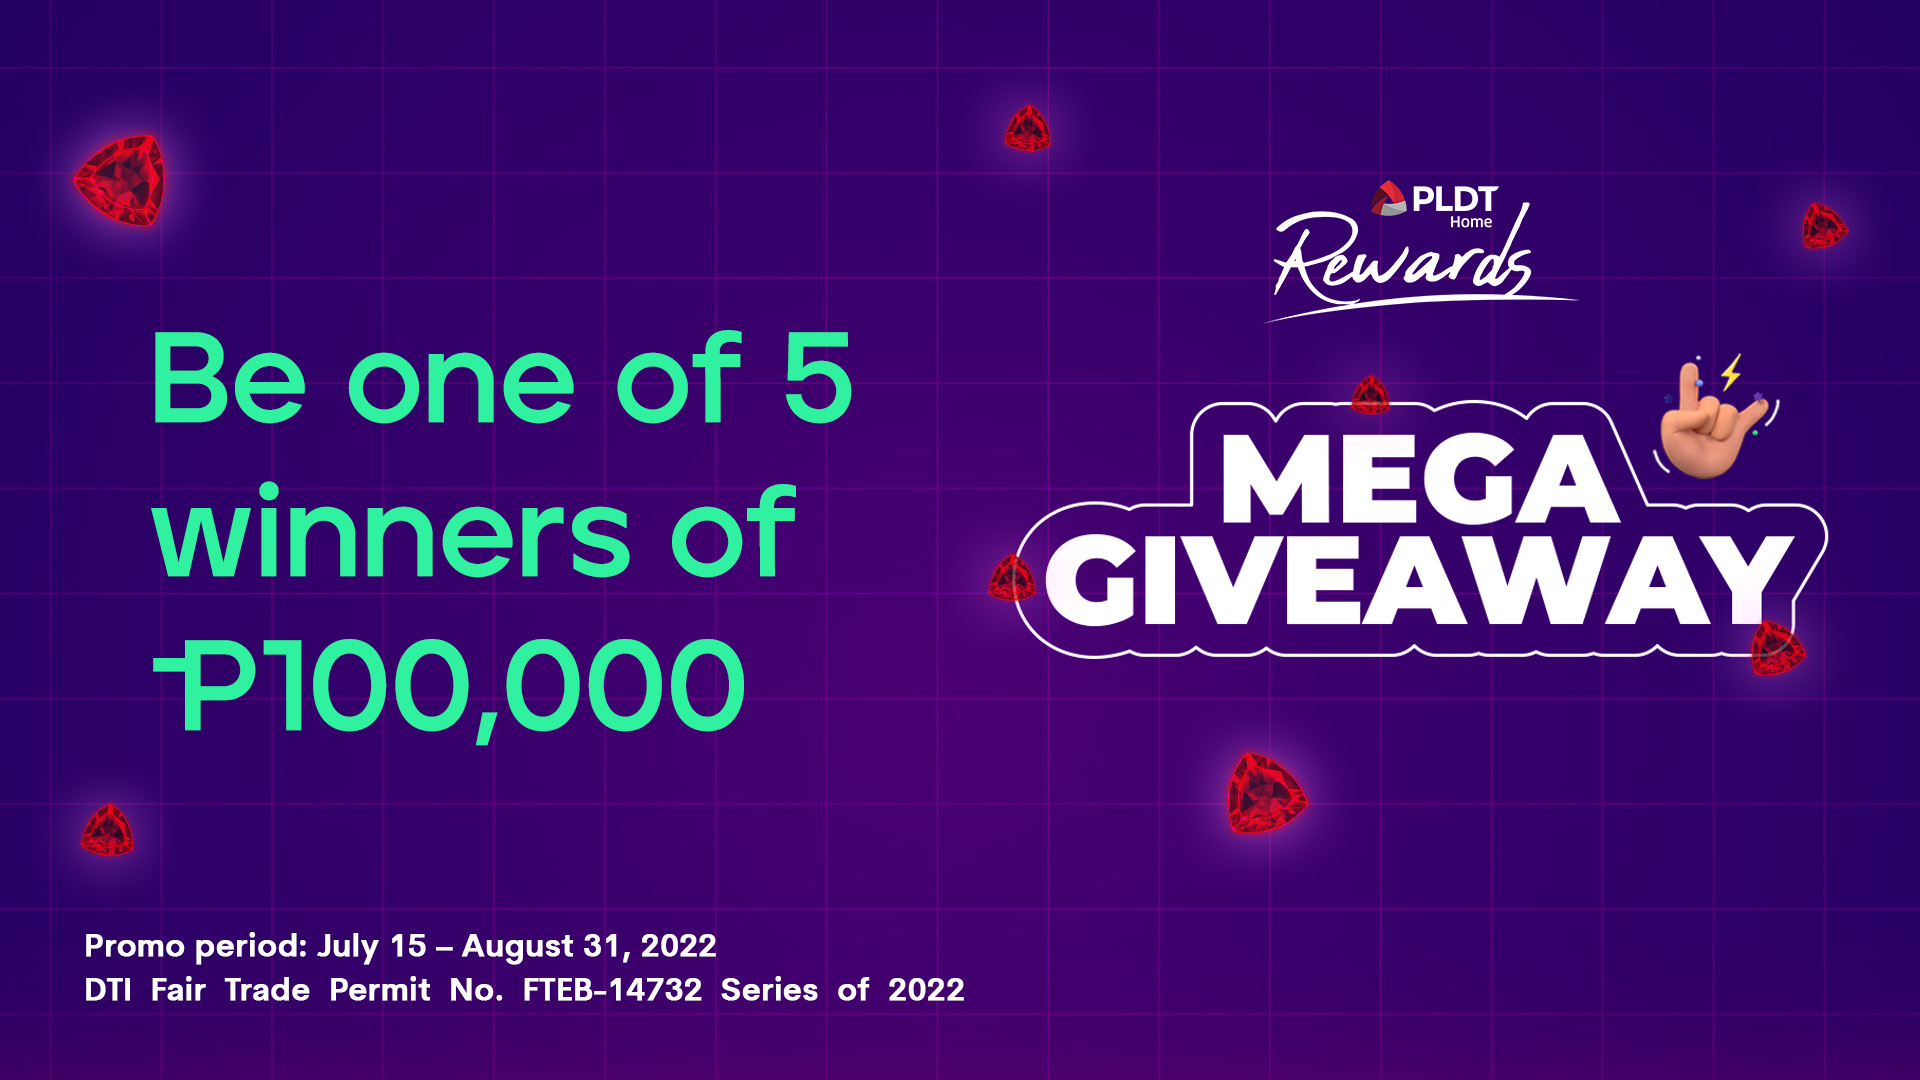 Be one of the 5 Winners of P100,000!